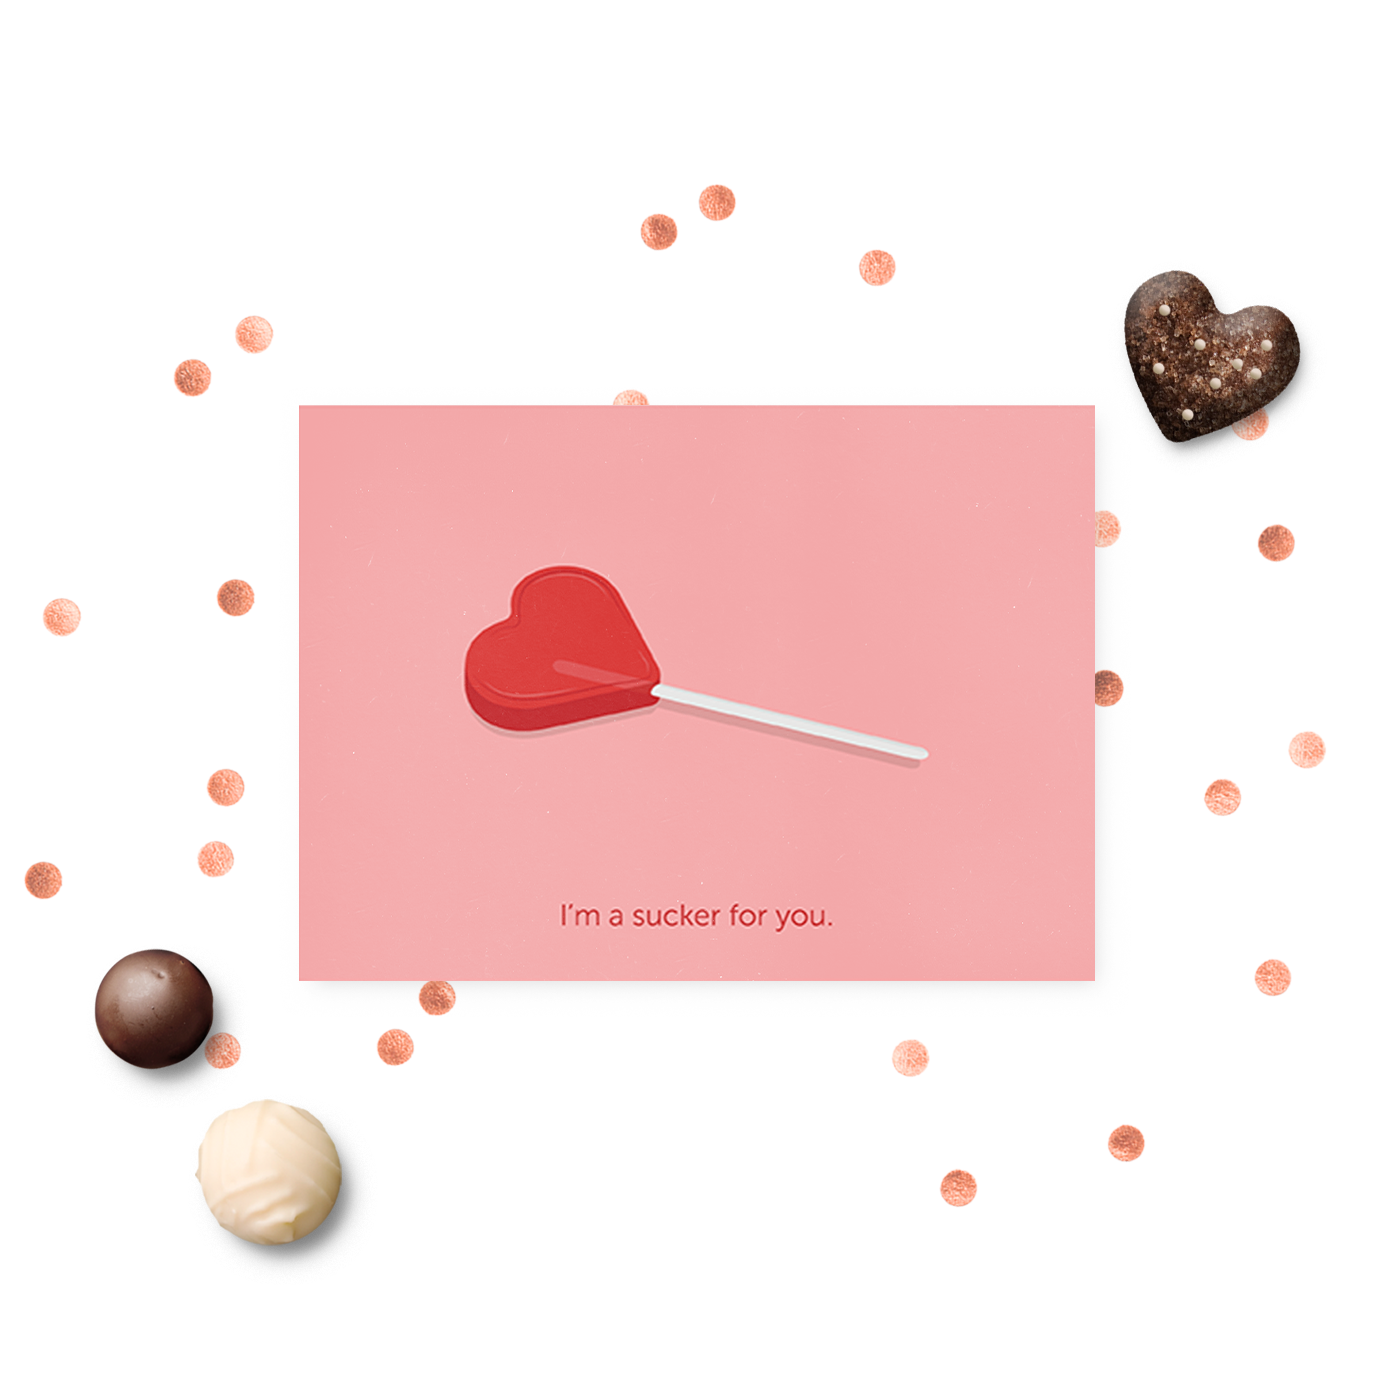 illustration of a heart-shaped lollipop with text reading "I'm a sucker for you."